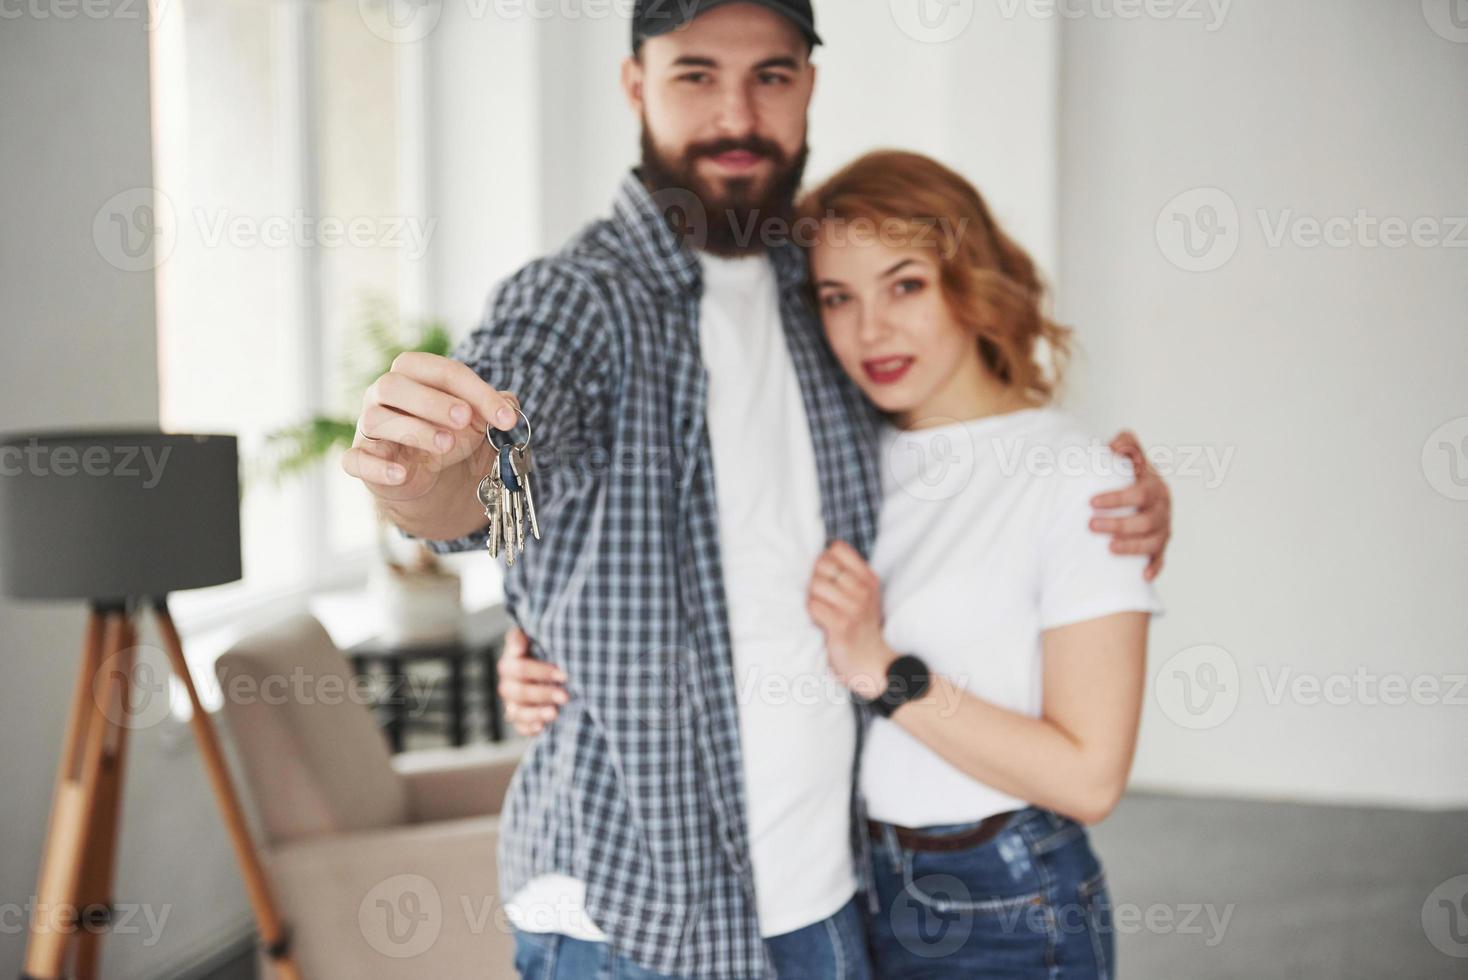 This is success. Happy couple together in their new house. Conception of moving photo